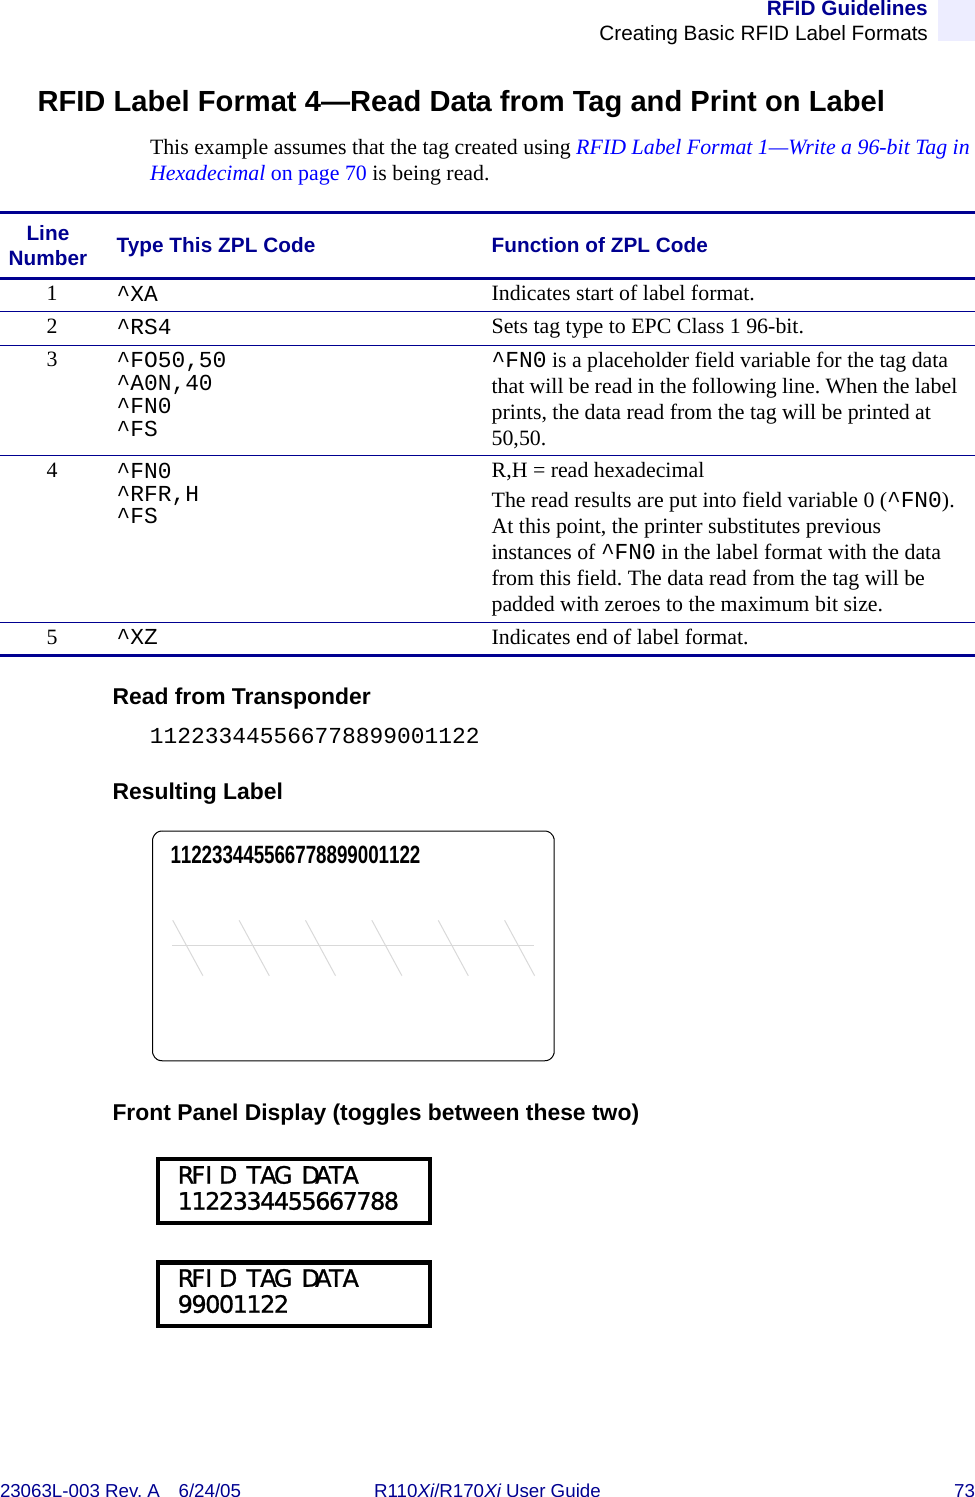 RFID GuidelinesCreating Basic RFID Label Formats23063L-003 Rev. A 6/24/05 R110Xi/R170Xi User Guide 73RFID Label Format 4—Read Data from Tag and Print on LabelThis example assumes that the tag created using RFID Label Format 1—Write a 96-bit Tag in Hexadecimal on page 70 is being read.Read from Transponder112233445566778899001122Resulting LabelFront Panel Display (toggles between these two)Line Number Type This ZPL Code Function of ZPL Code1^XA Indicates start of label format.2^RS4 Sets tag type to EPC Class 1 96-bit.3^FO50,50^A0N,40^FN0^FS^FN0 is a placeholder field variable for the tag data that will be read in the following line. When the label prints, the data read from the tag will be printed at 50,50.4^FN0^RFR,H^FSR,H = read hexadecimalThe read results are put into field variable 0 (^FN0). At this point, the printer substitutes previous instances of ^FN0 in the label format with the data from this field. The data read from the tag will be padded with zeroes to the maximum bit size.5^XZ Indicates end of label format.112233445566778899001122 RFID TAG DATA 1122334455667788 RFID TAG DATA 99001122